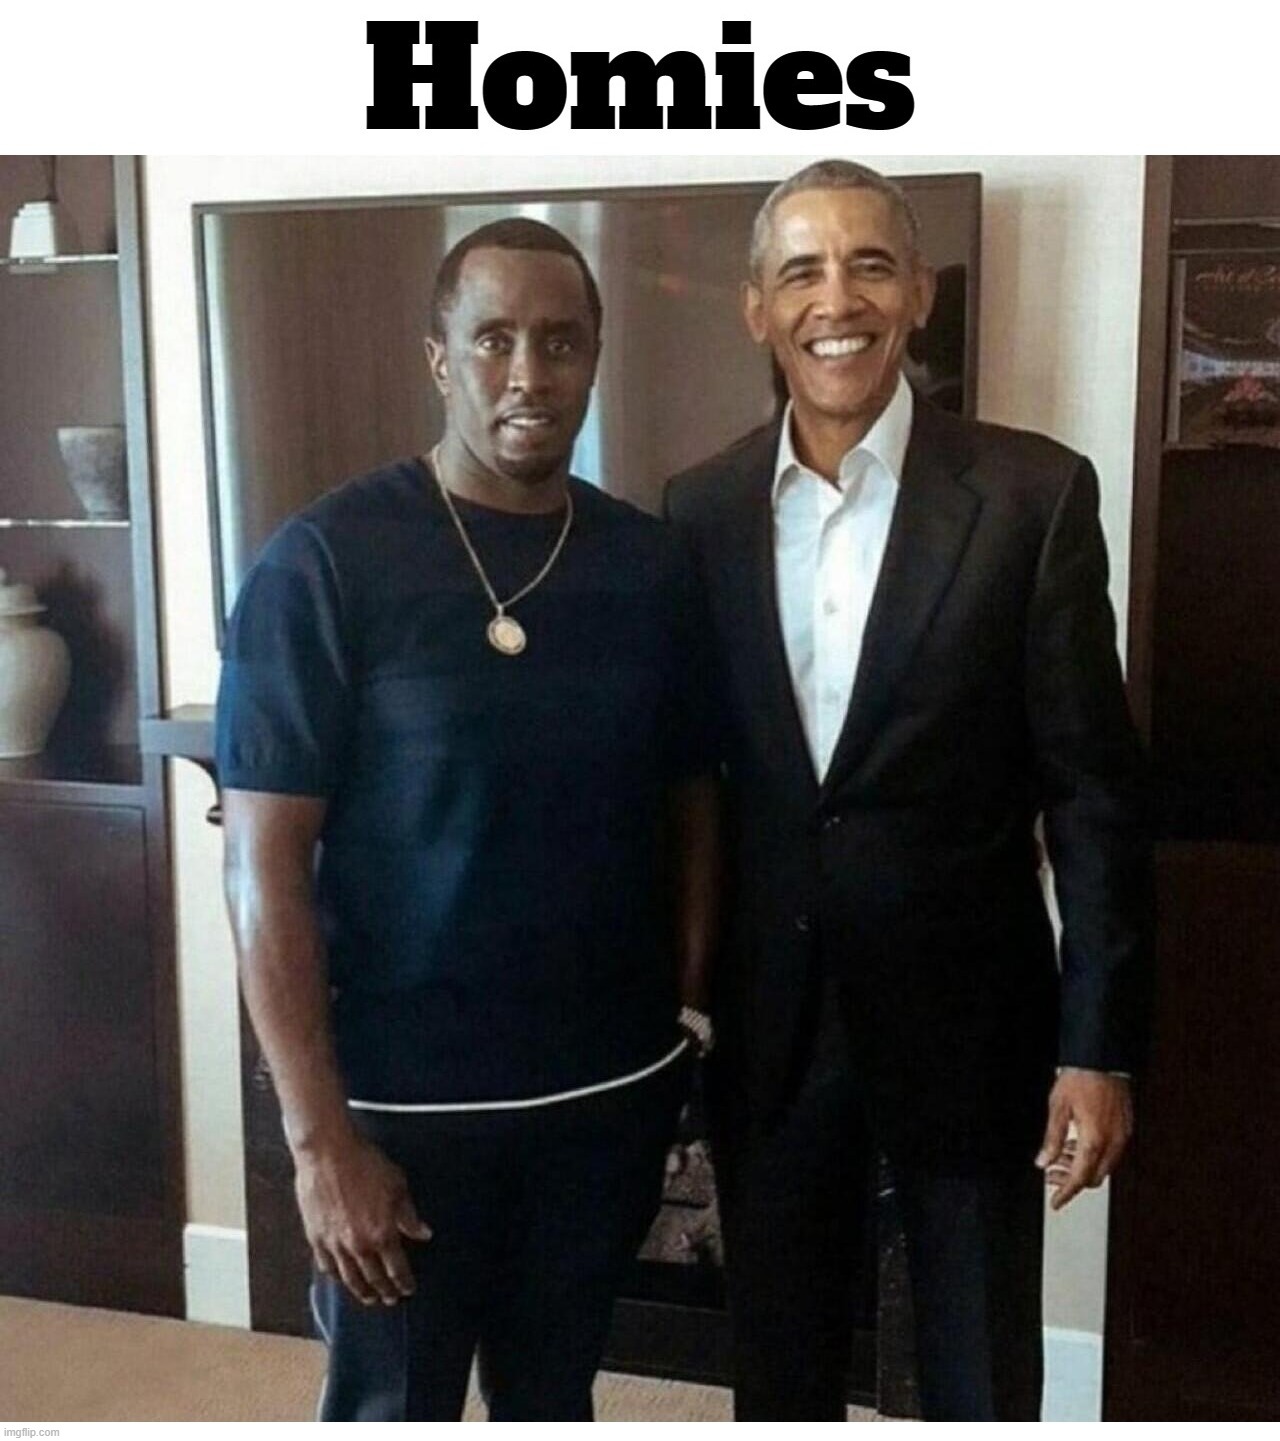 Birds of a Feather | image tagged in obama,birds of a feather,cocaine,drug addiction,human trafficking,p diddy | made w/ Imgflip meme maker